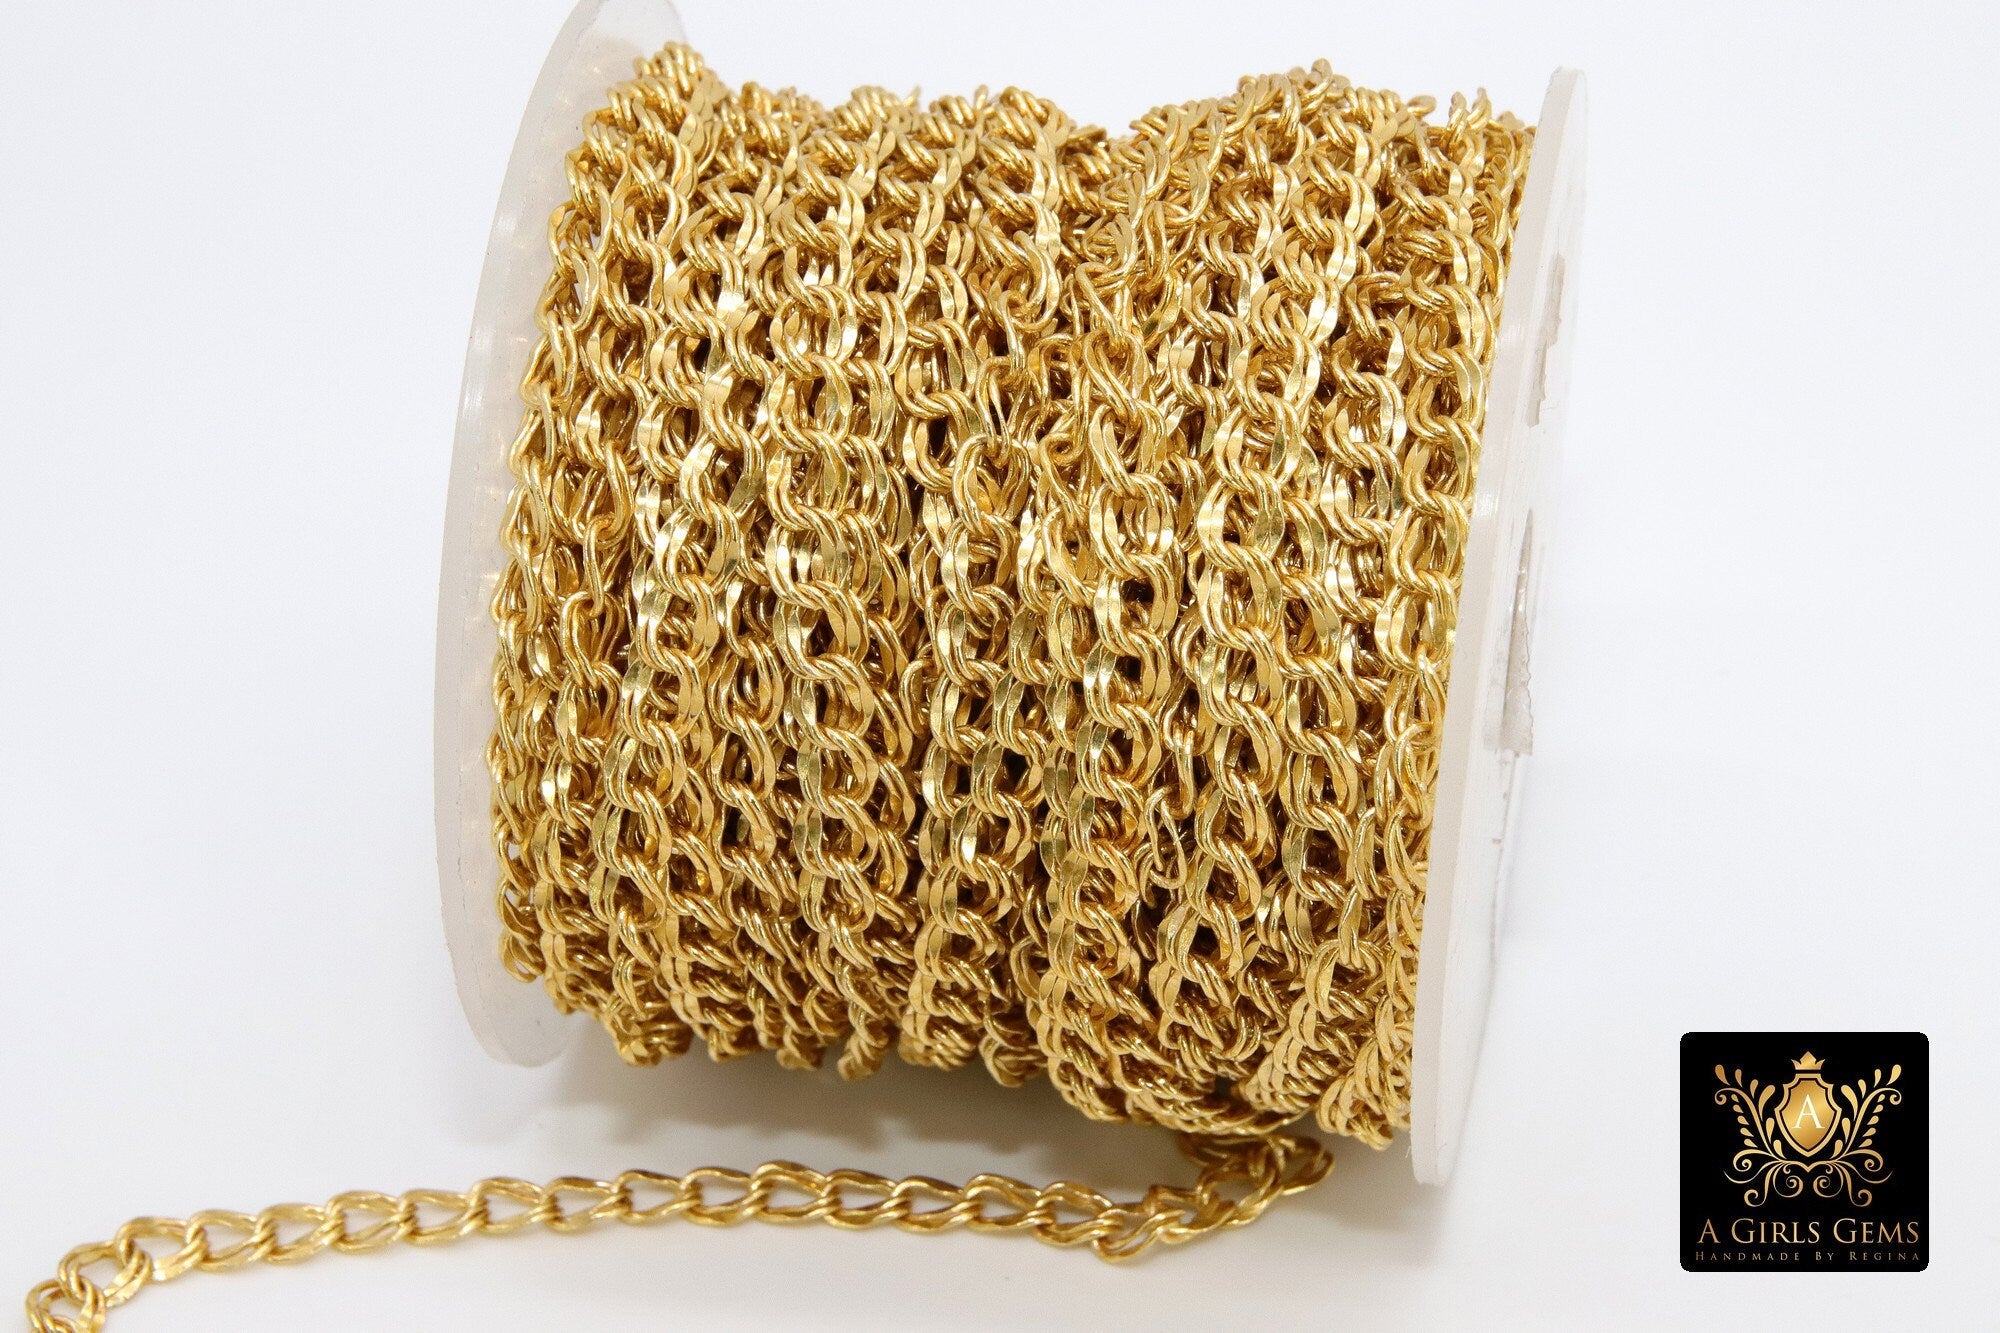 Cable Chain, 4 mm Square Diamond Unfinished Necklace CH #201, 16 k Brushed Gold Dainty Jewelry Chains